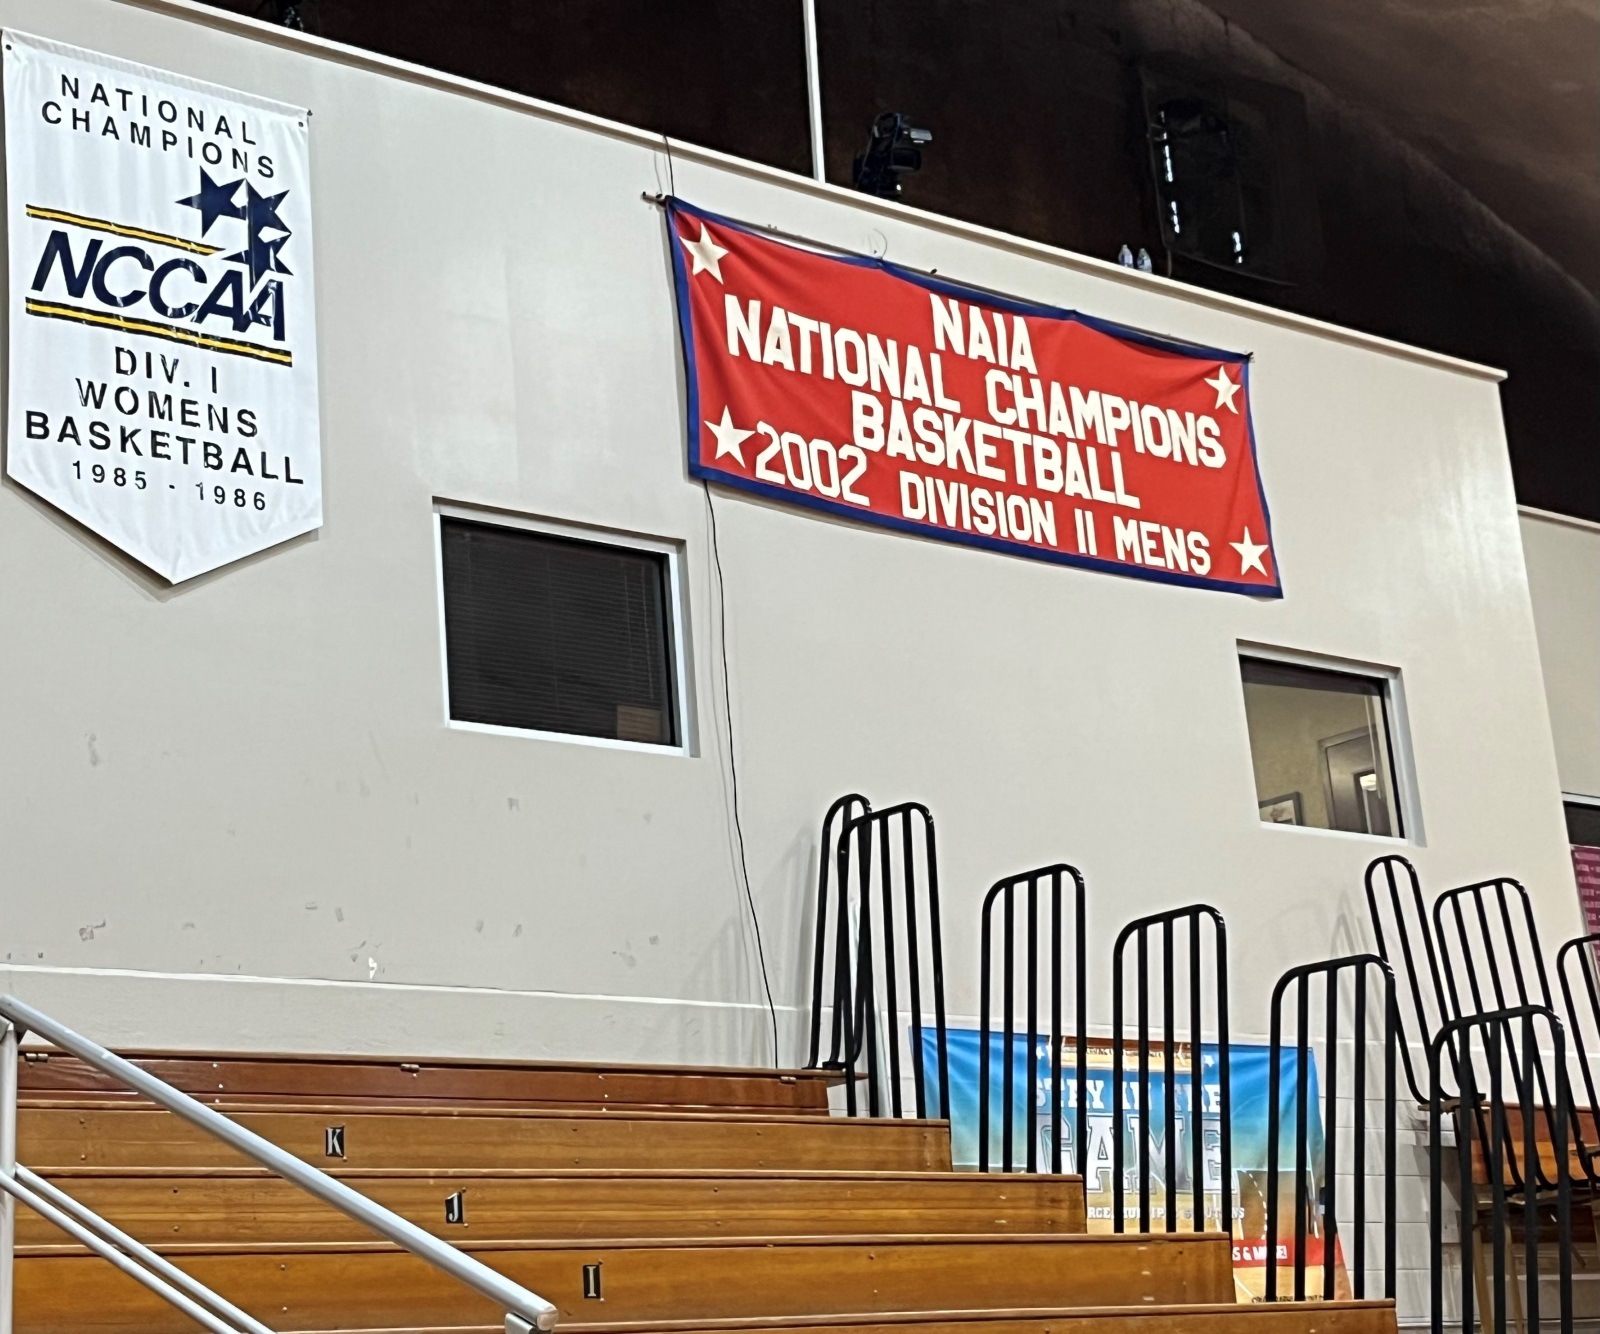 A red, white and blue banner hangs inside the Ashcroft Center. It reads "NAIA National Champions Basketball 2002 Division II Men's" (Photo by Lyndal Scranton)